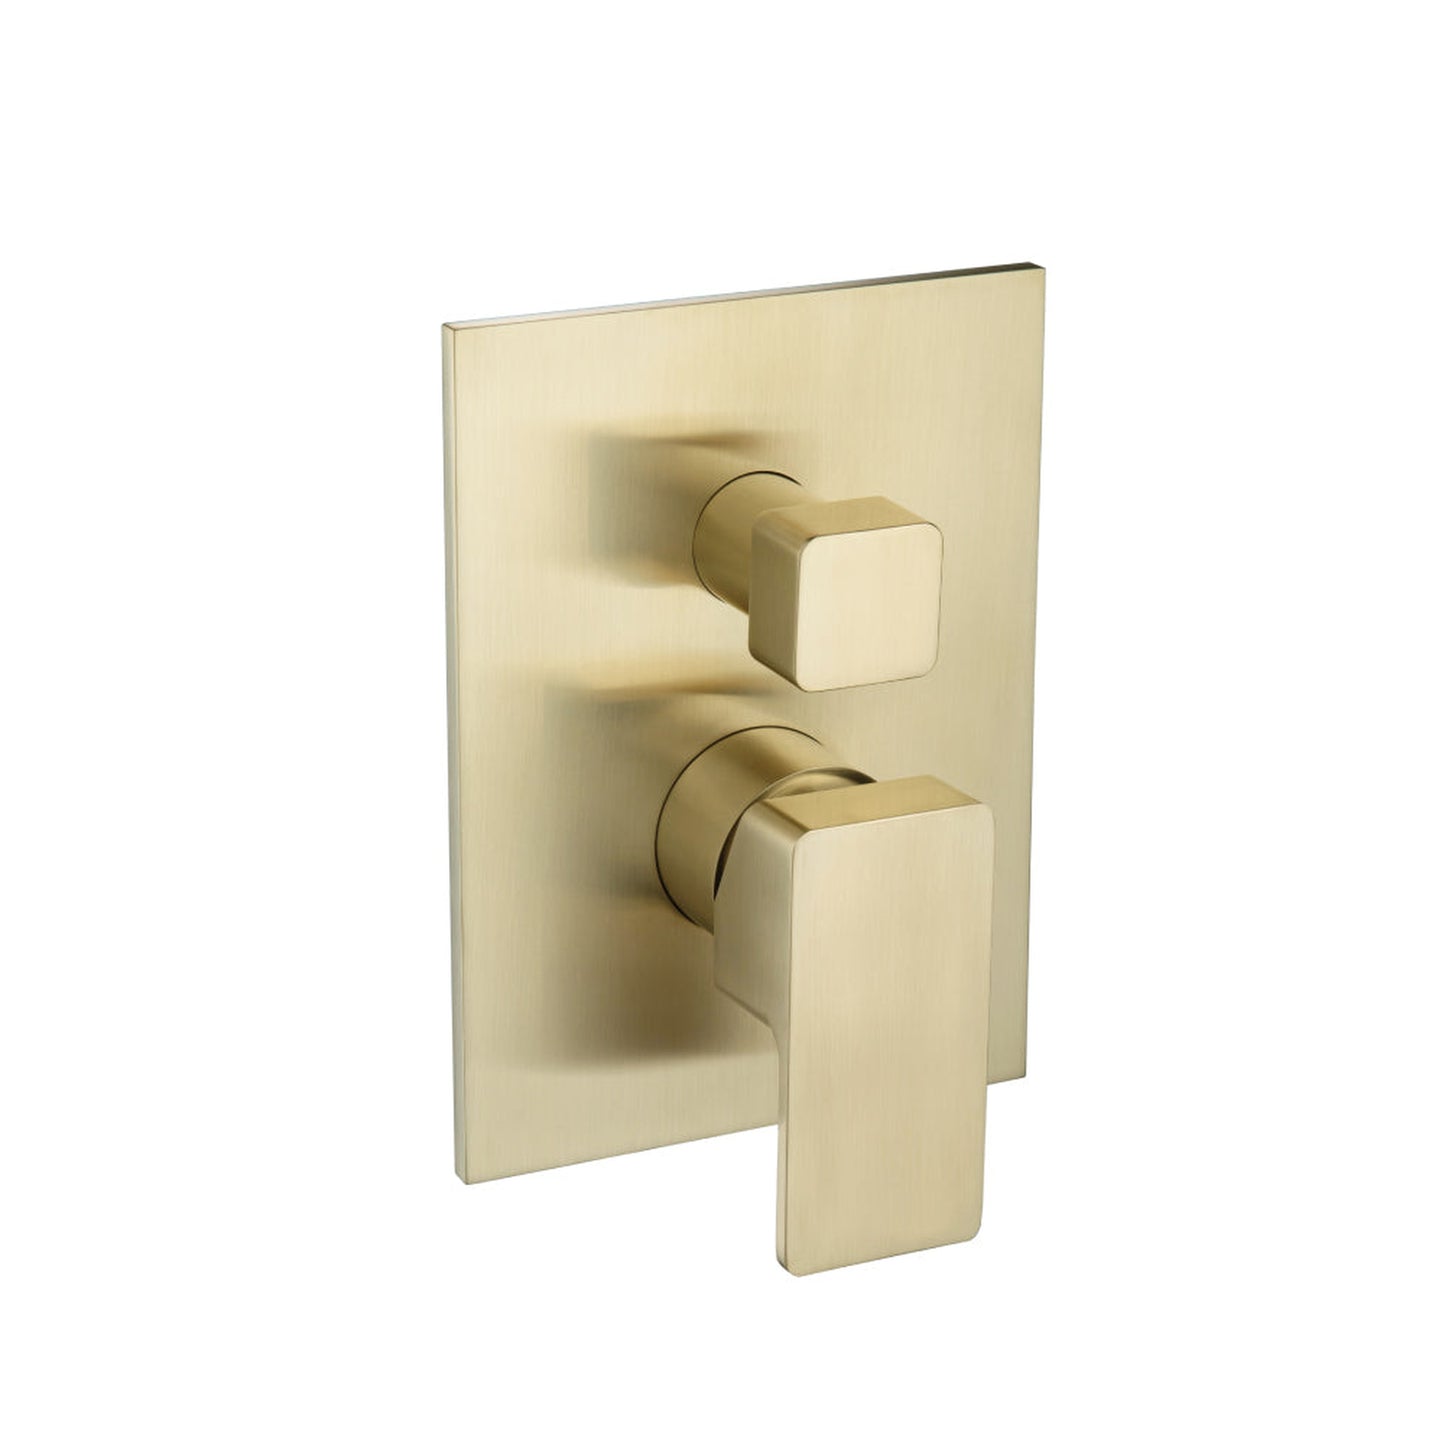 Isenberg Serie 196 Two Output Tub / Shower Trim With Pressure Balance Valve in Satin Brass